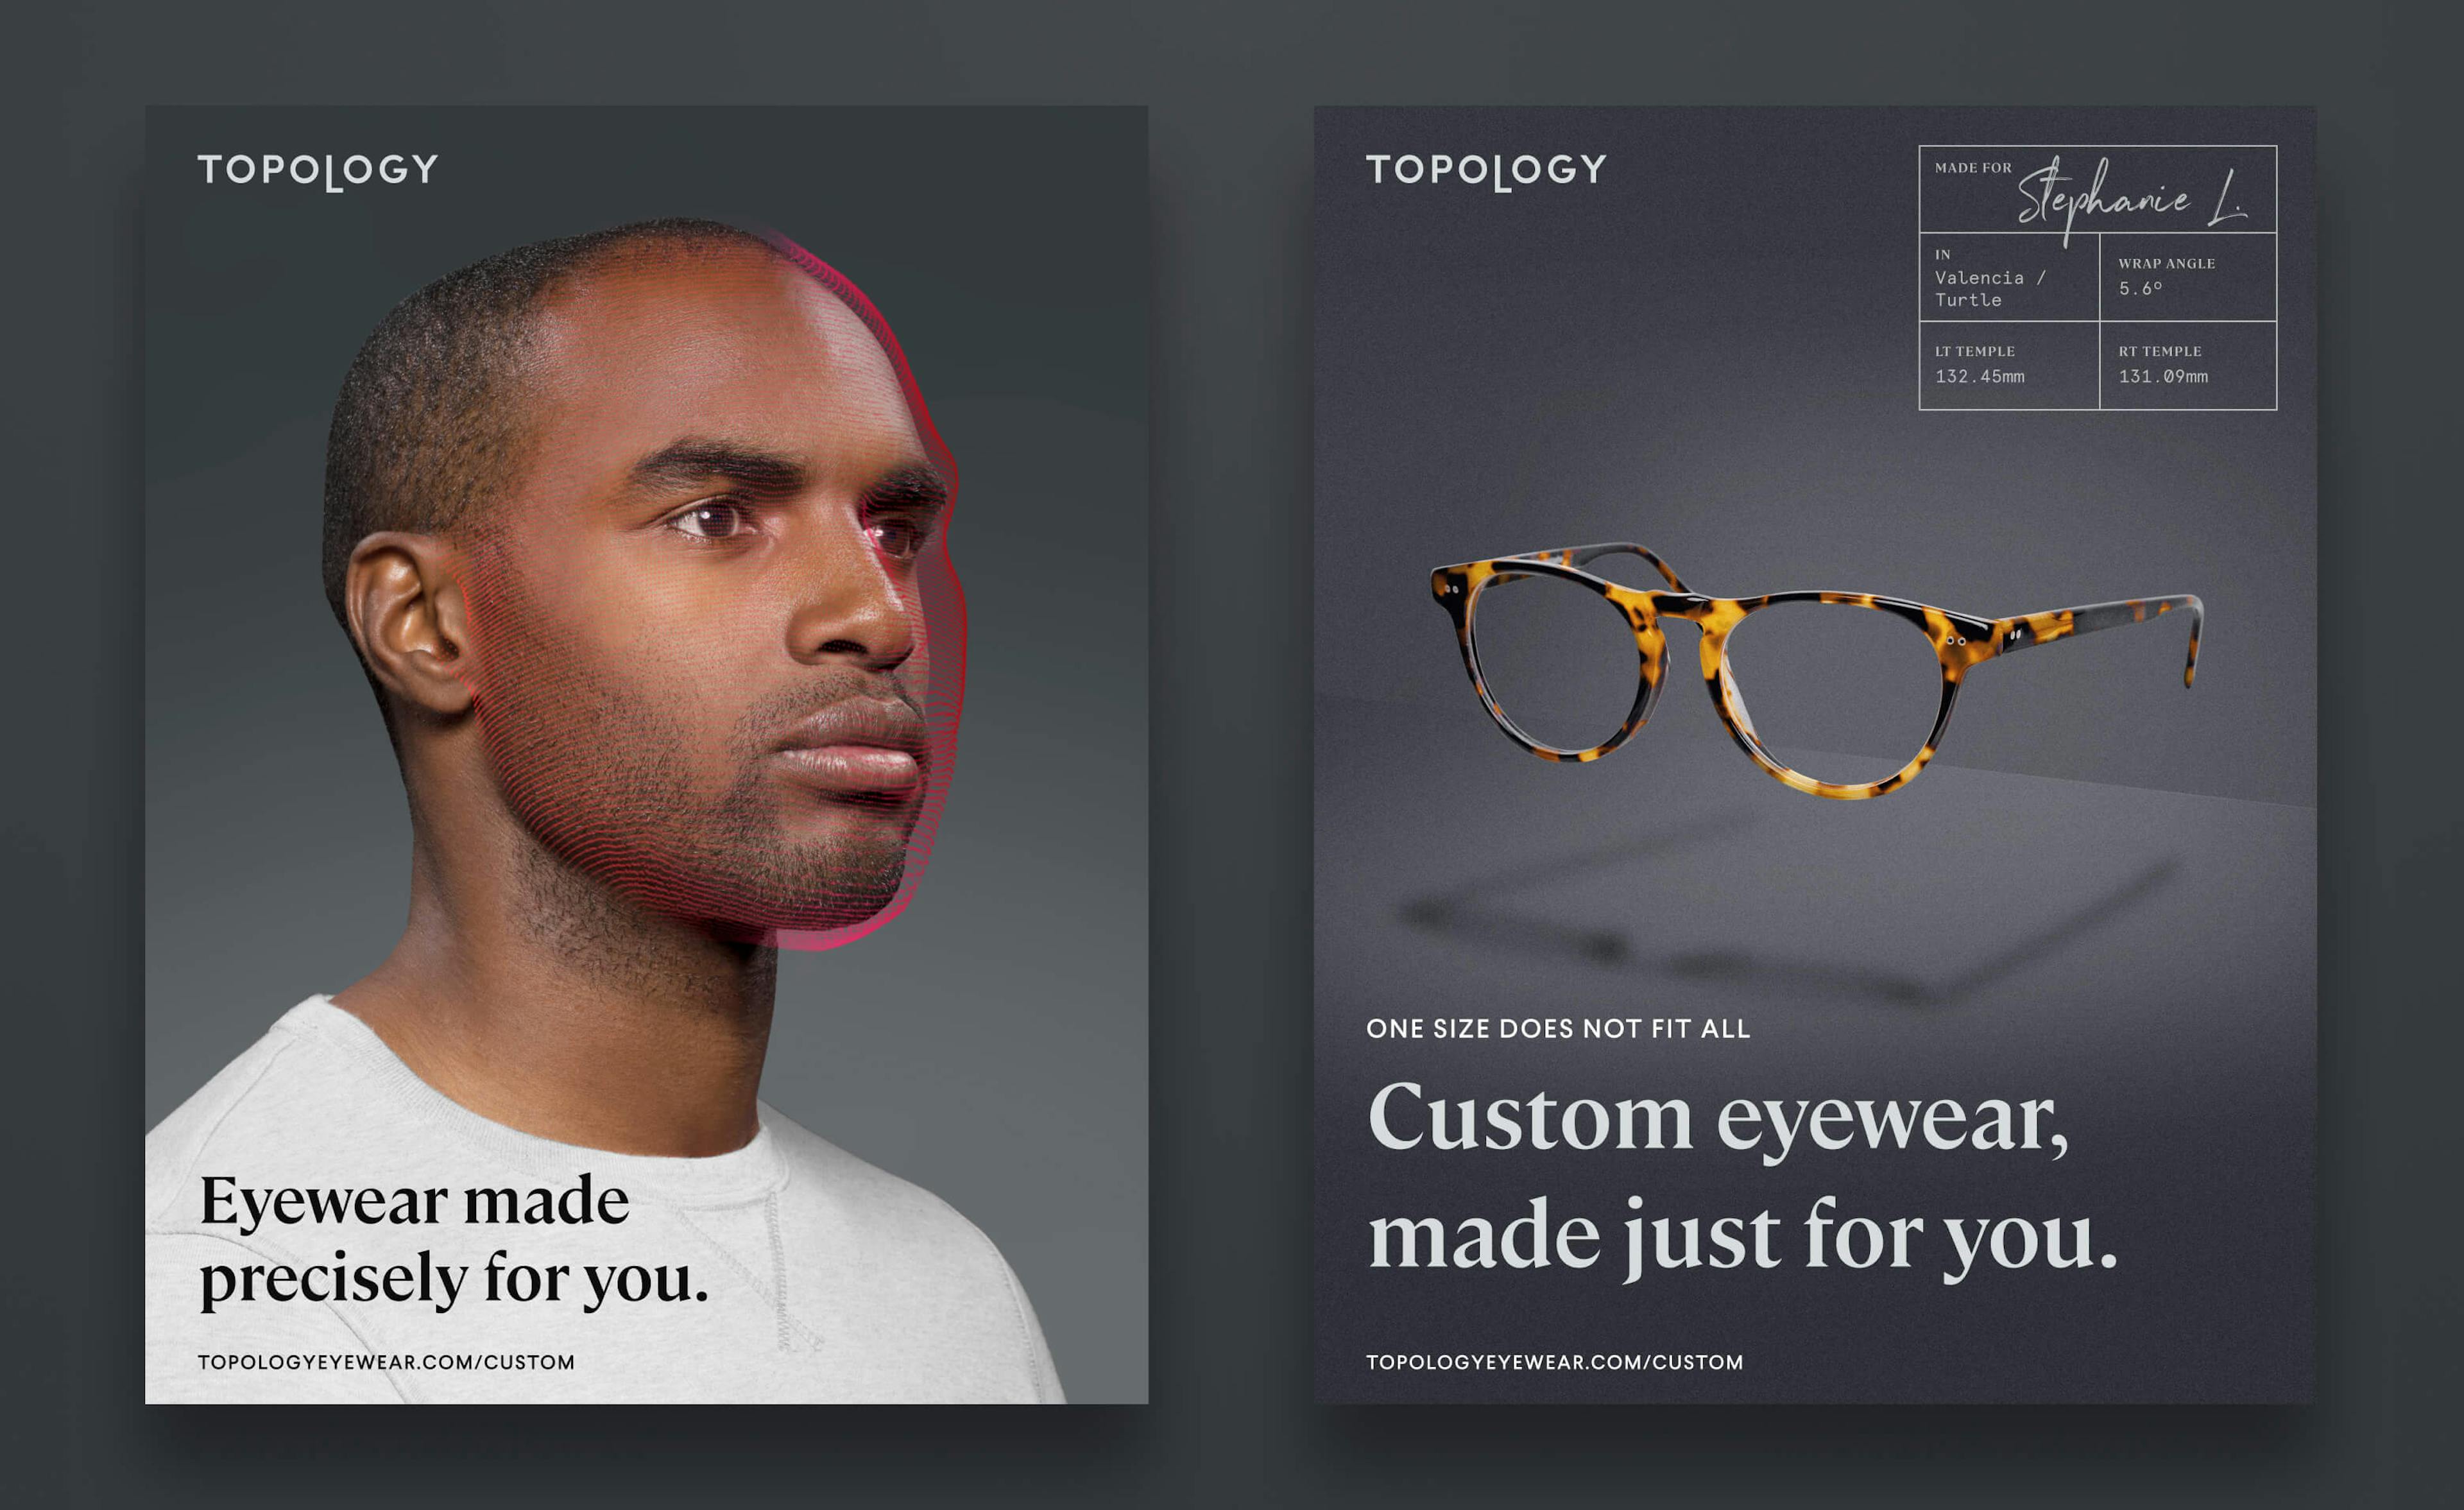 Ads for Topology